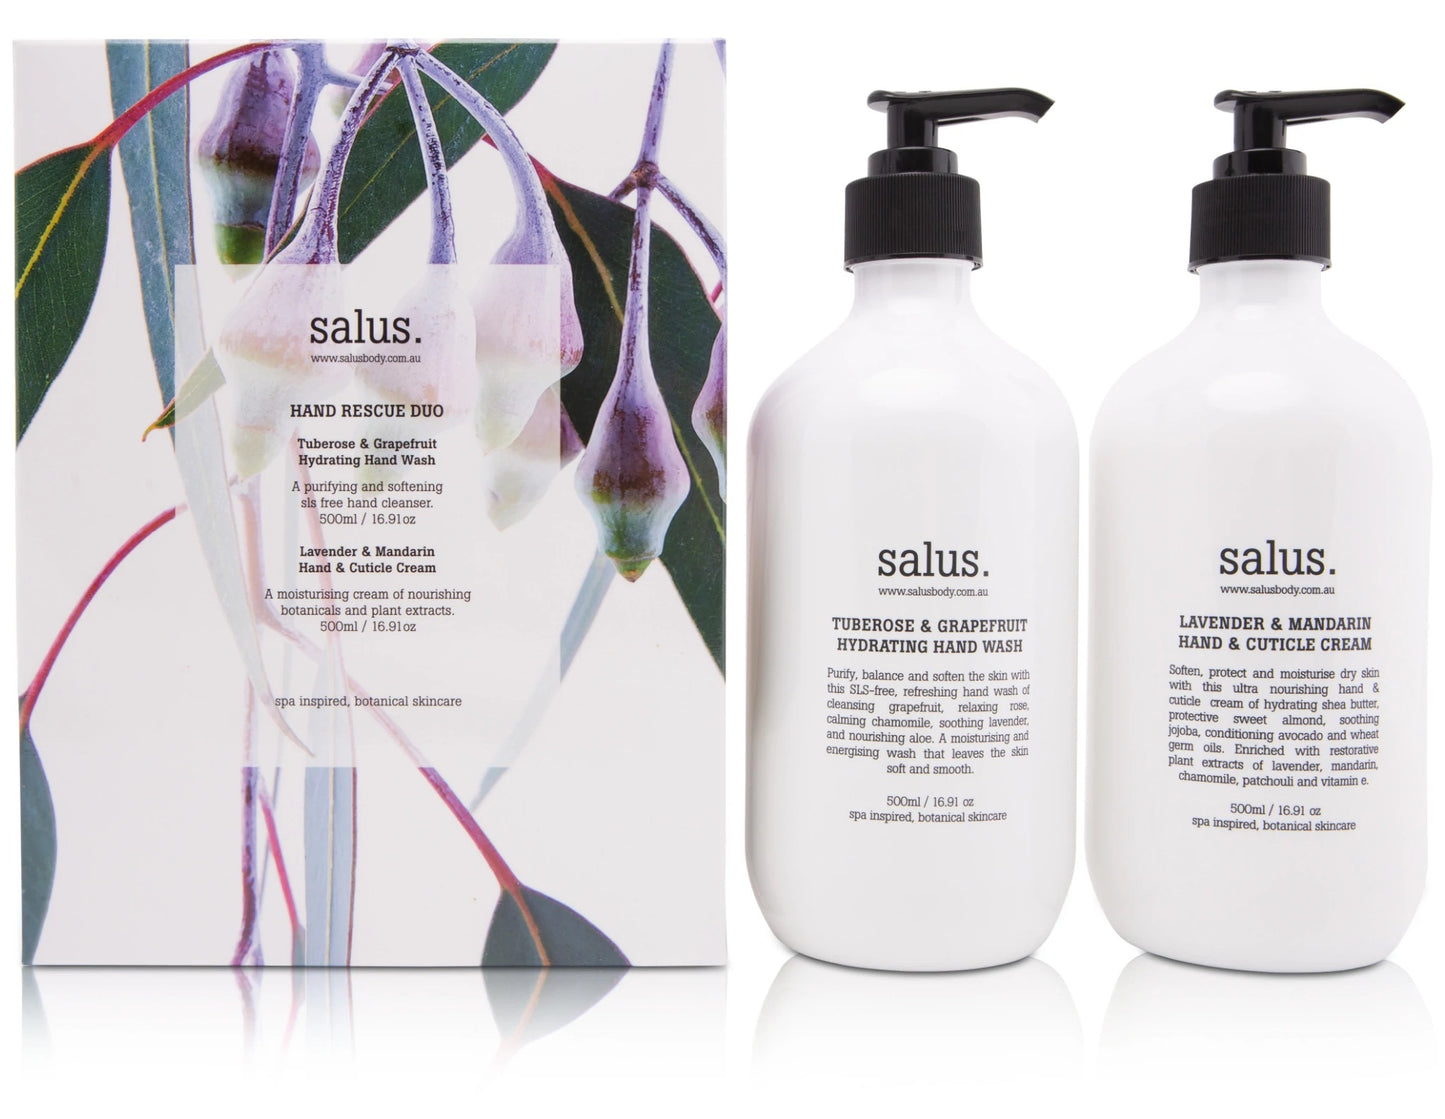 Salus hand wash and cuticle cream with packaging